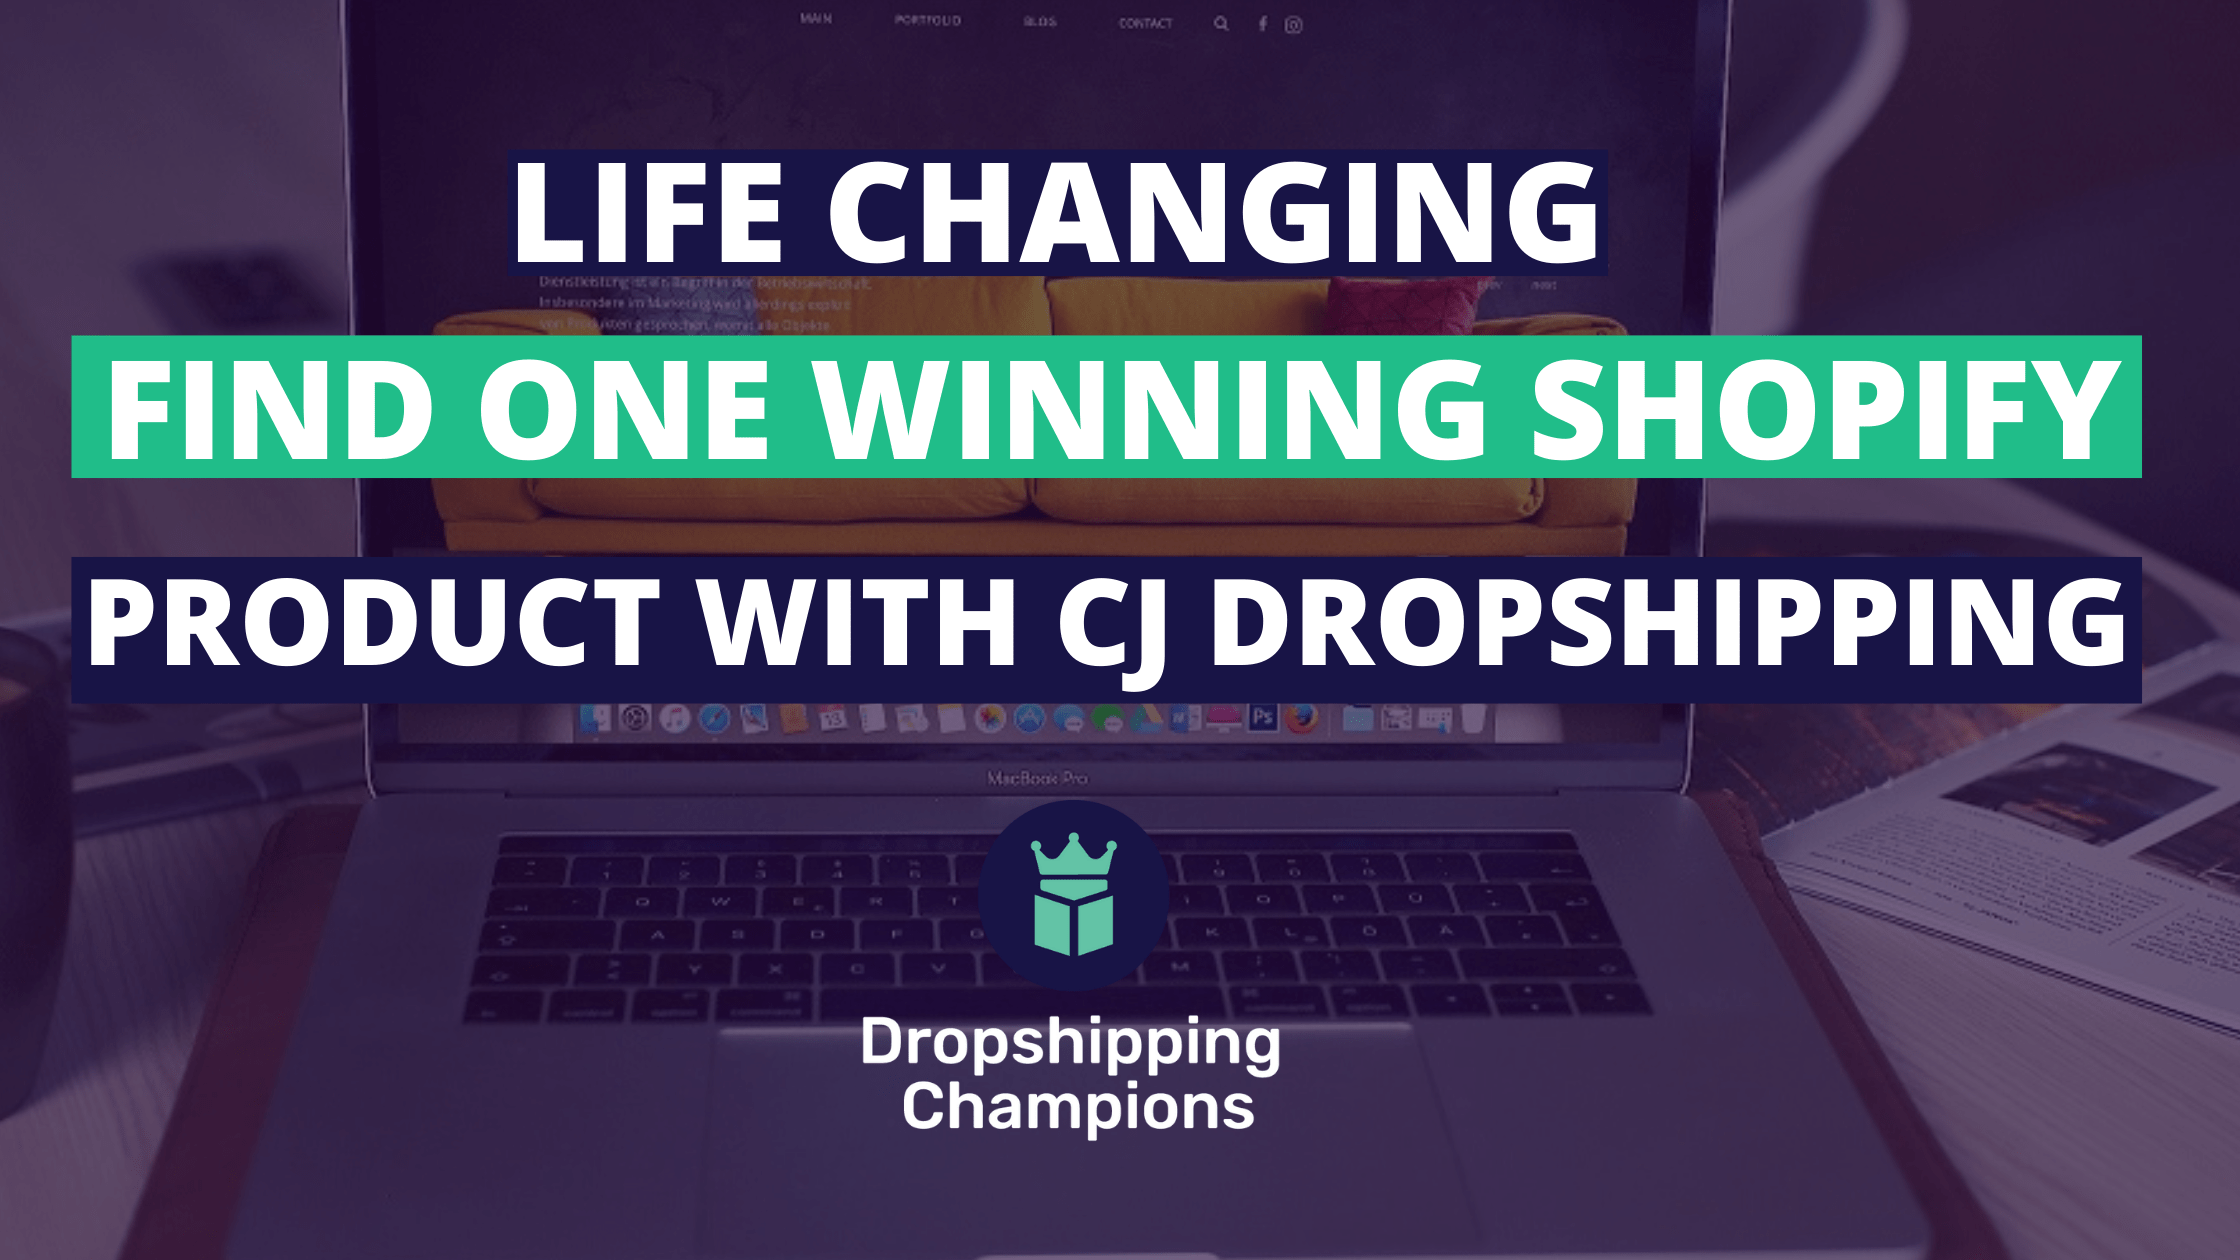 Life Changing: Find Just One Winning Shopify Product with CJ Dropshipping